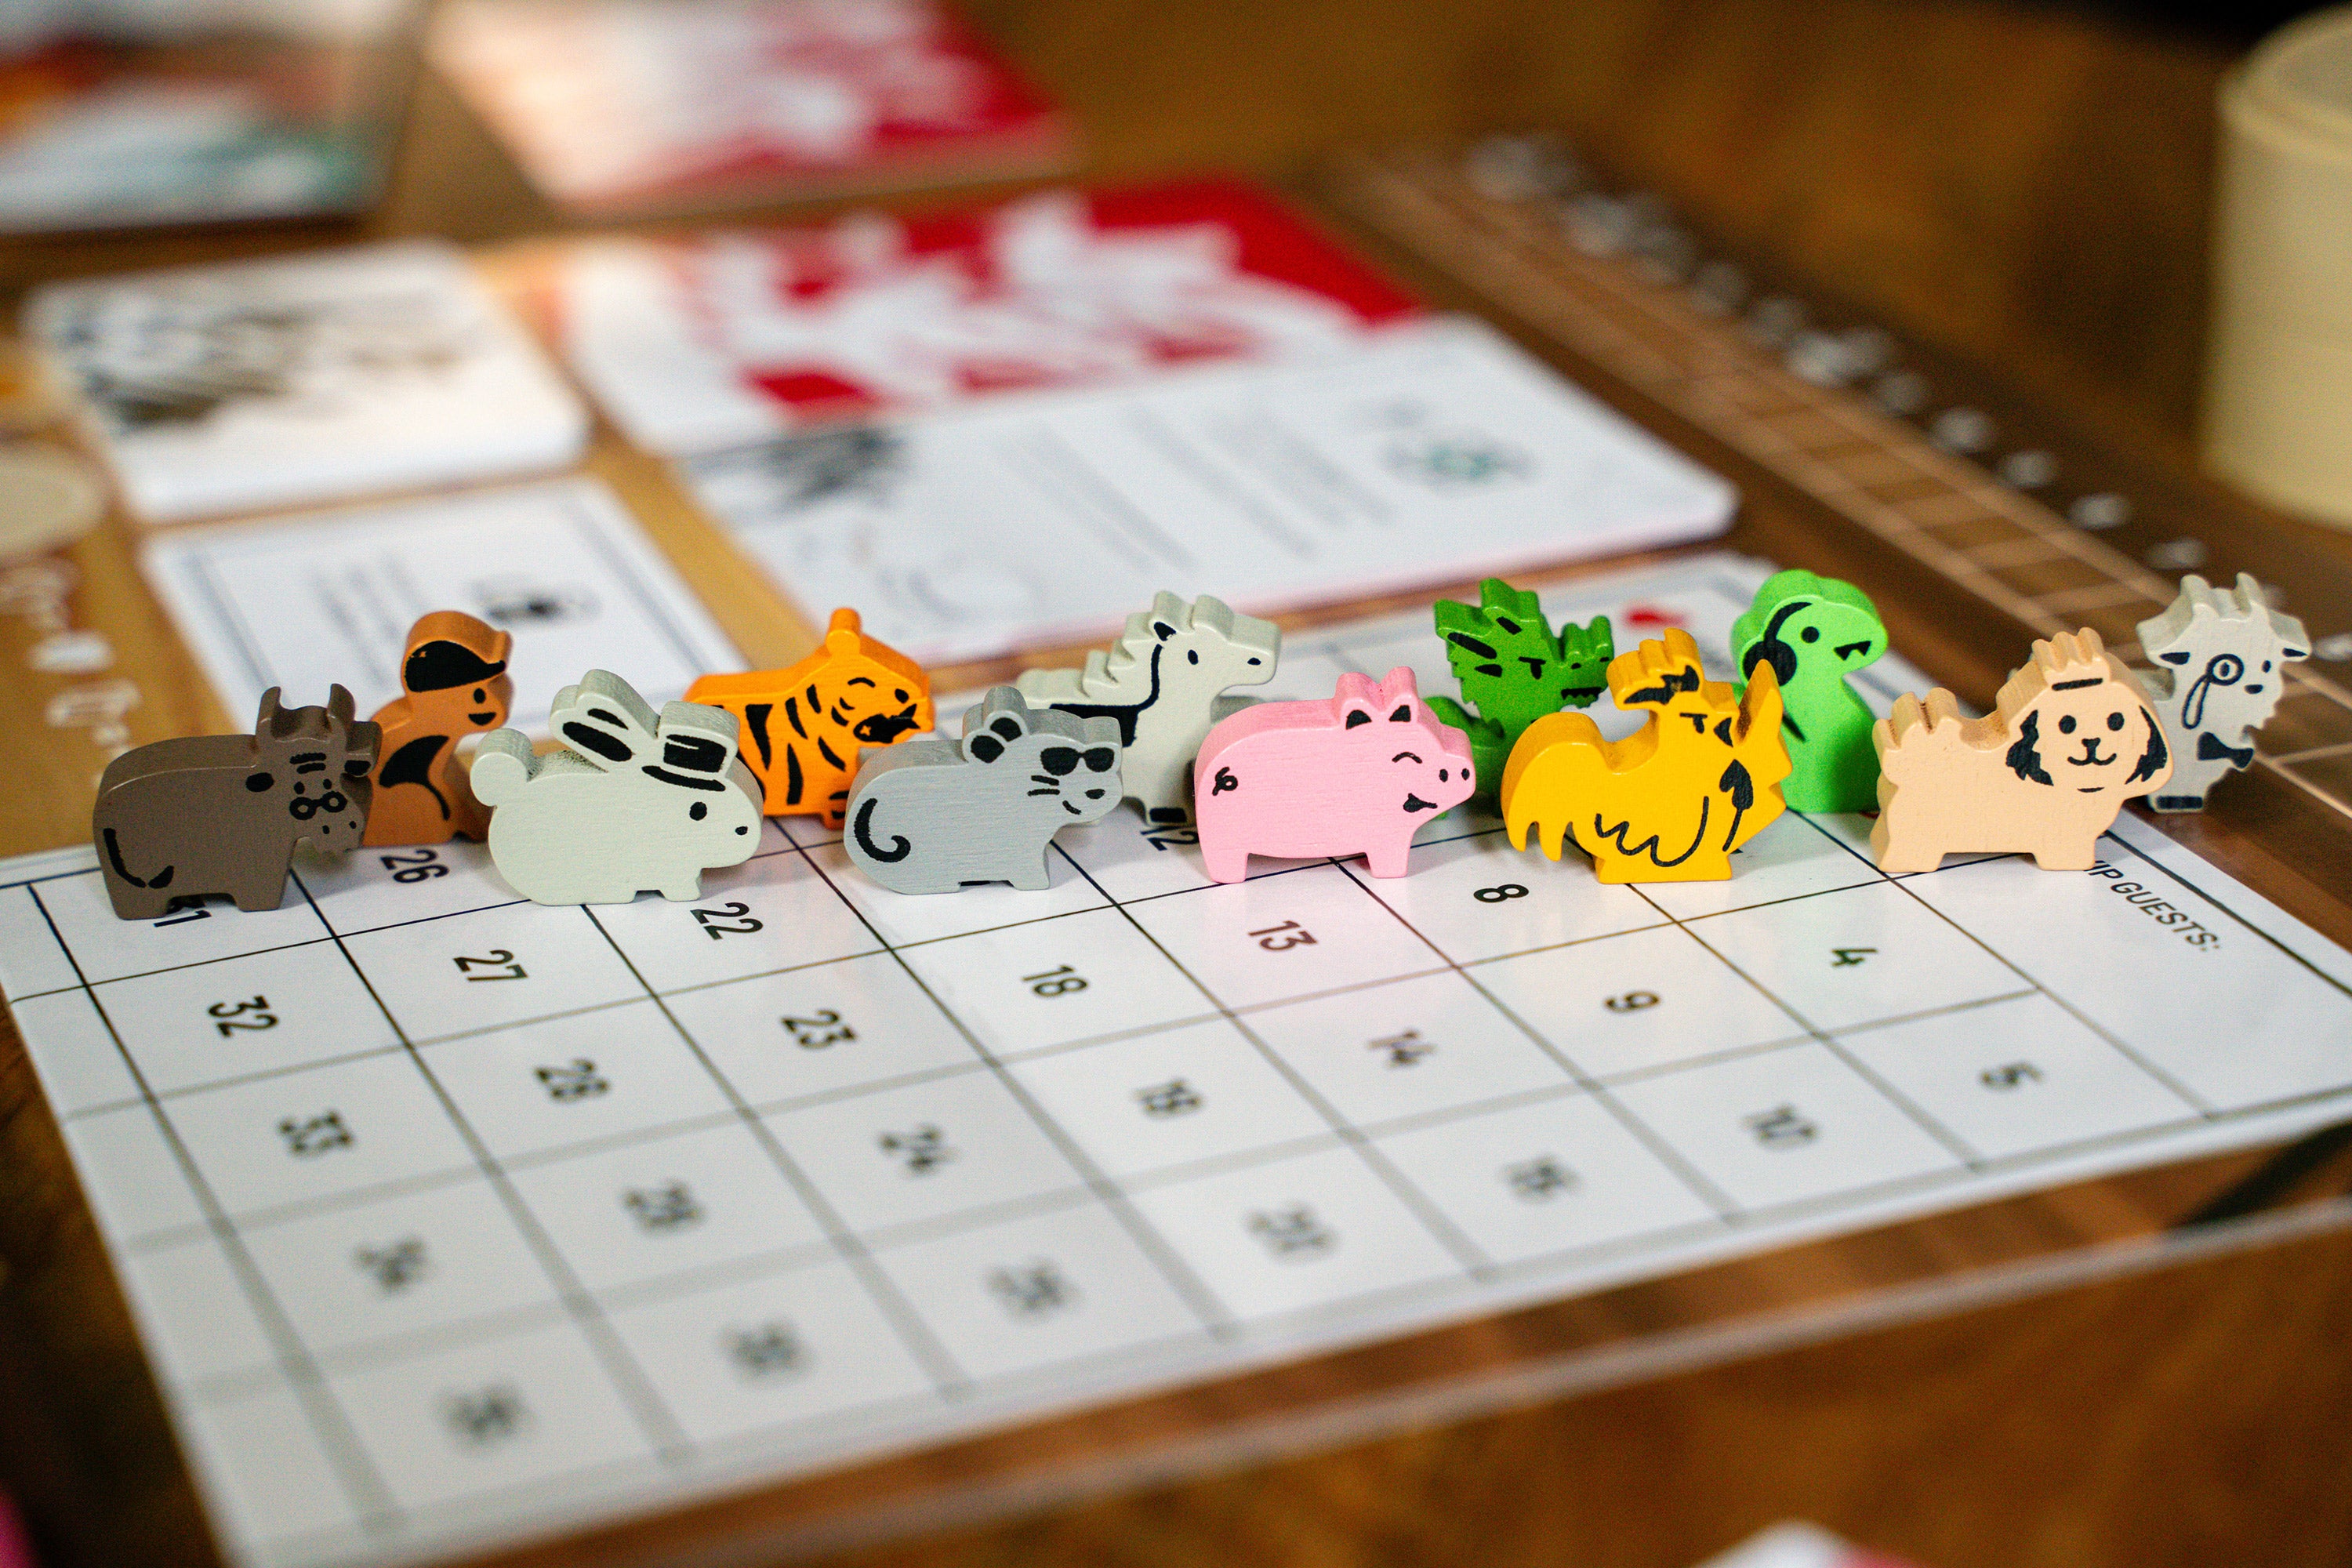 Deluxe Edition - Animal meeples to track scores